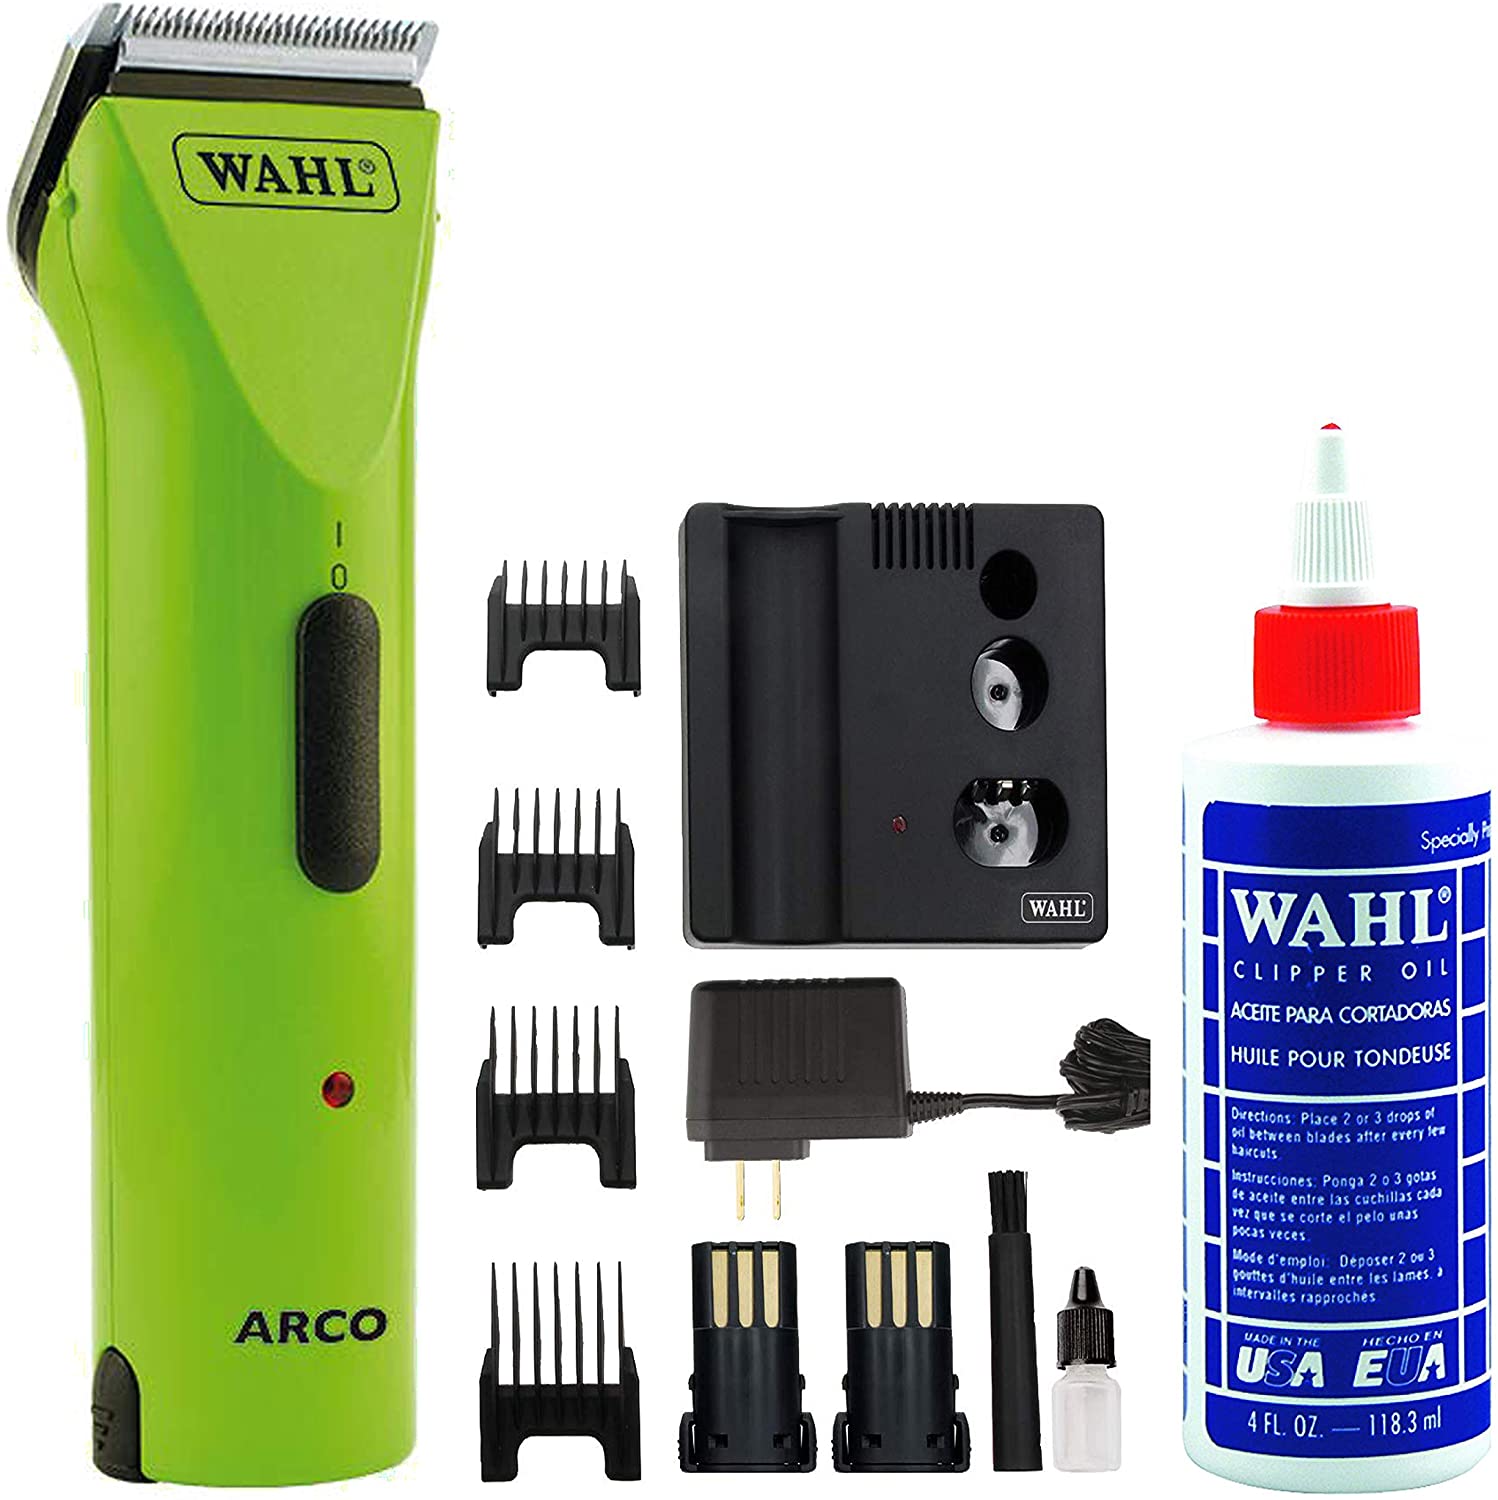 wahl dog clipper oil